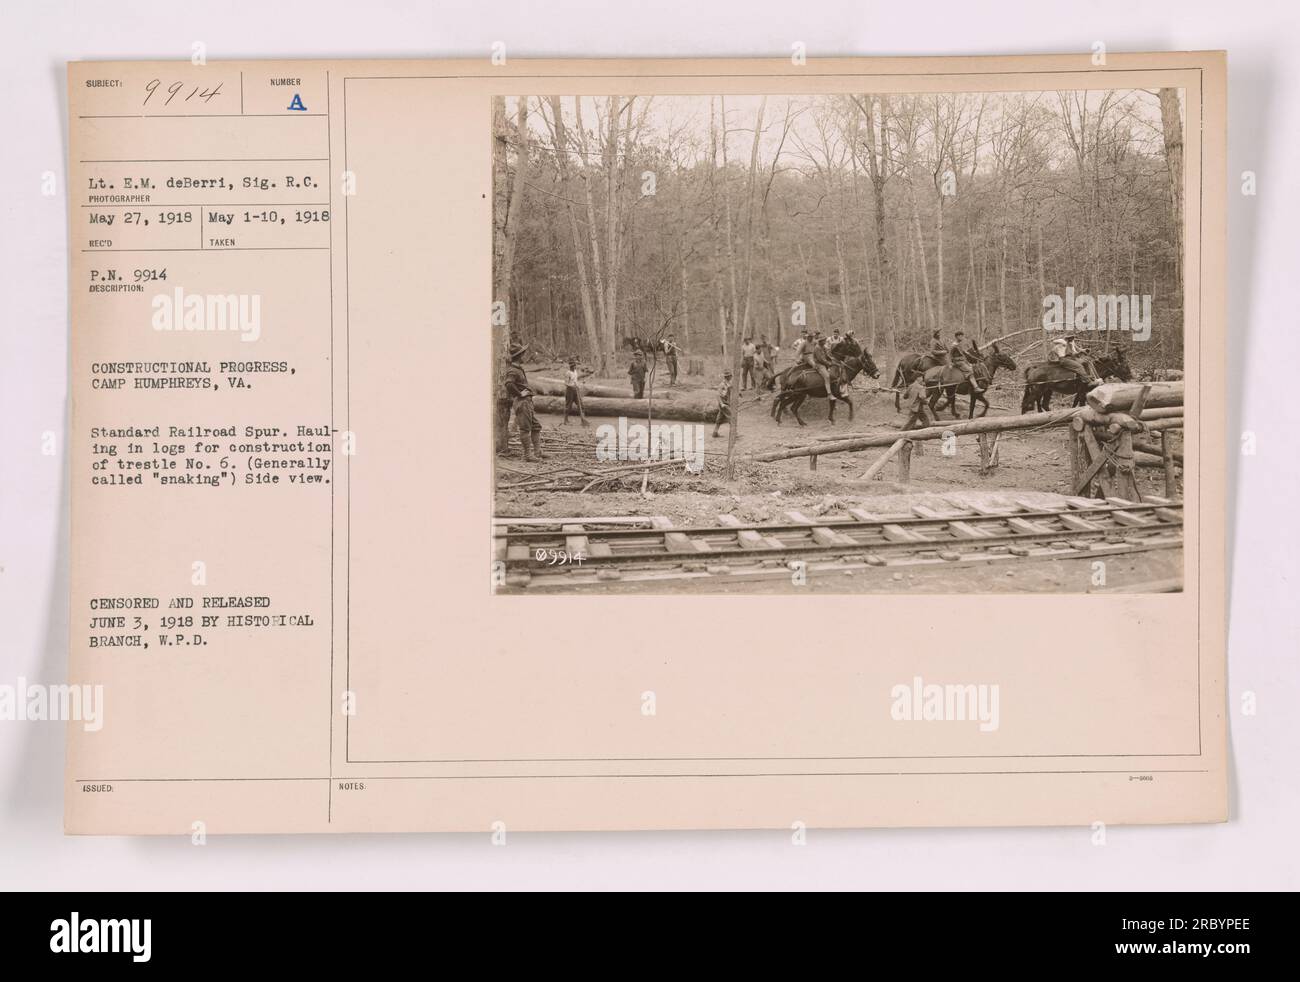 Constructional progress at Camp Humphreys, Virginia. This image shows the process of hauling in logs for the construction of trestle No. 6, also known as 'snaking.' The photograph was taken on May 27, 1918, by Lieutenant E.M. deBerri of the Signal Corps. It was censored and released on June 3, 1918, by the Historical Branch, W.P.D. Stock Photo